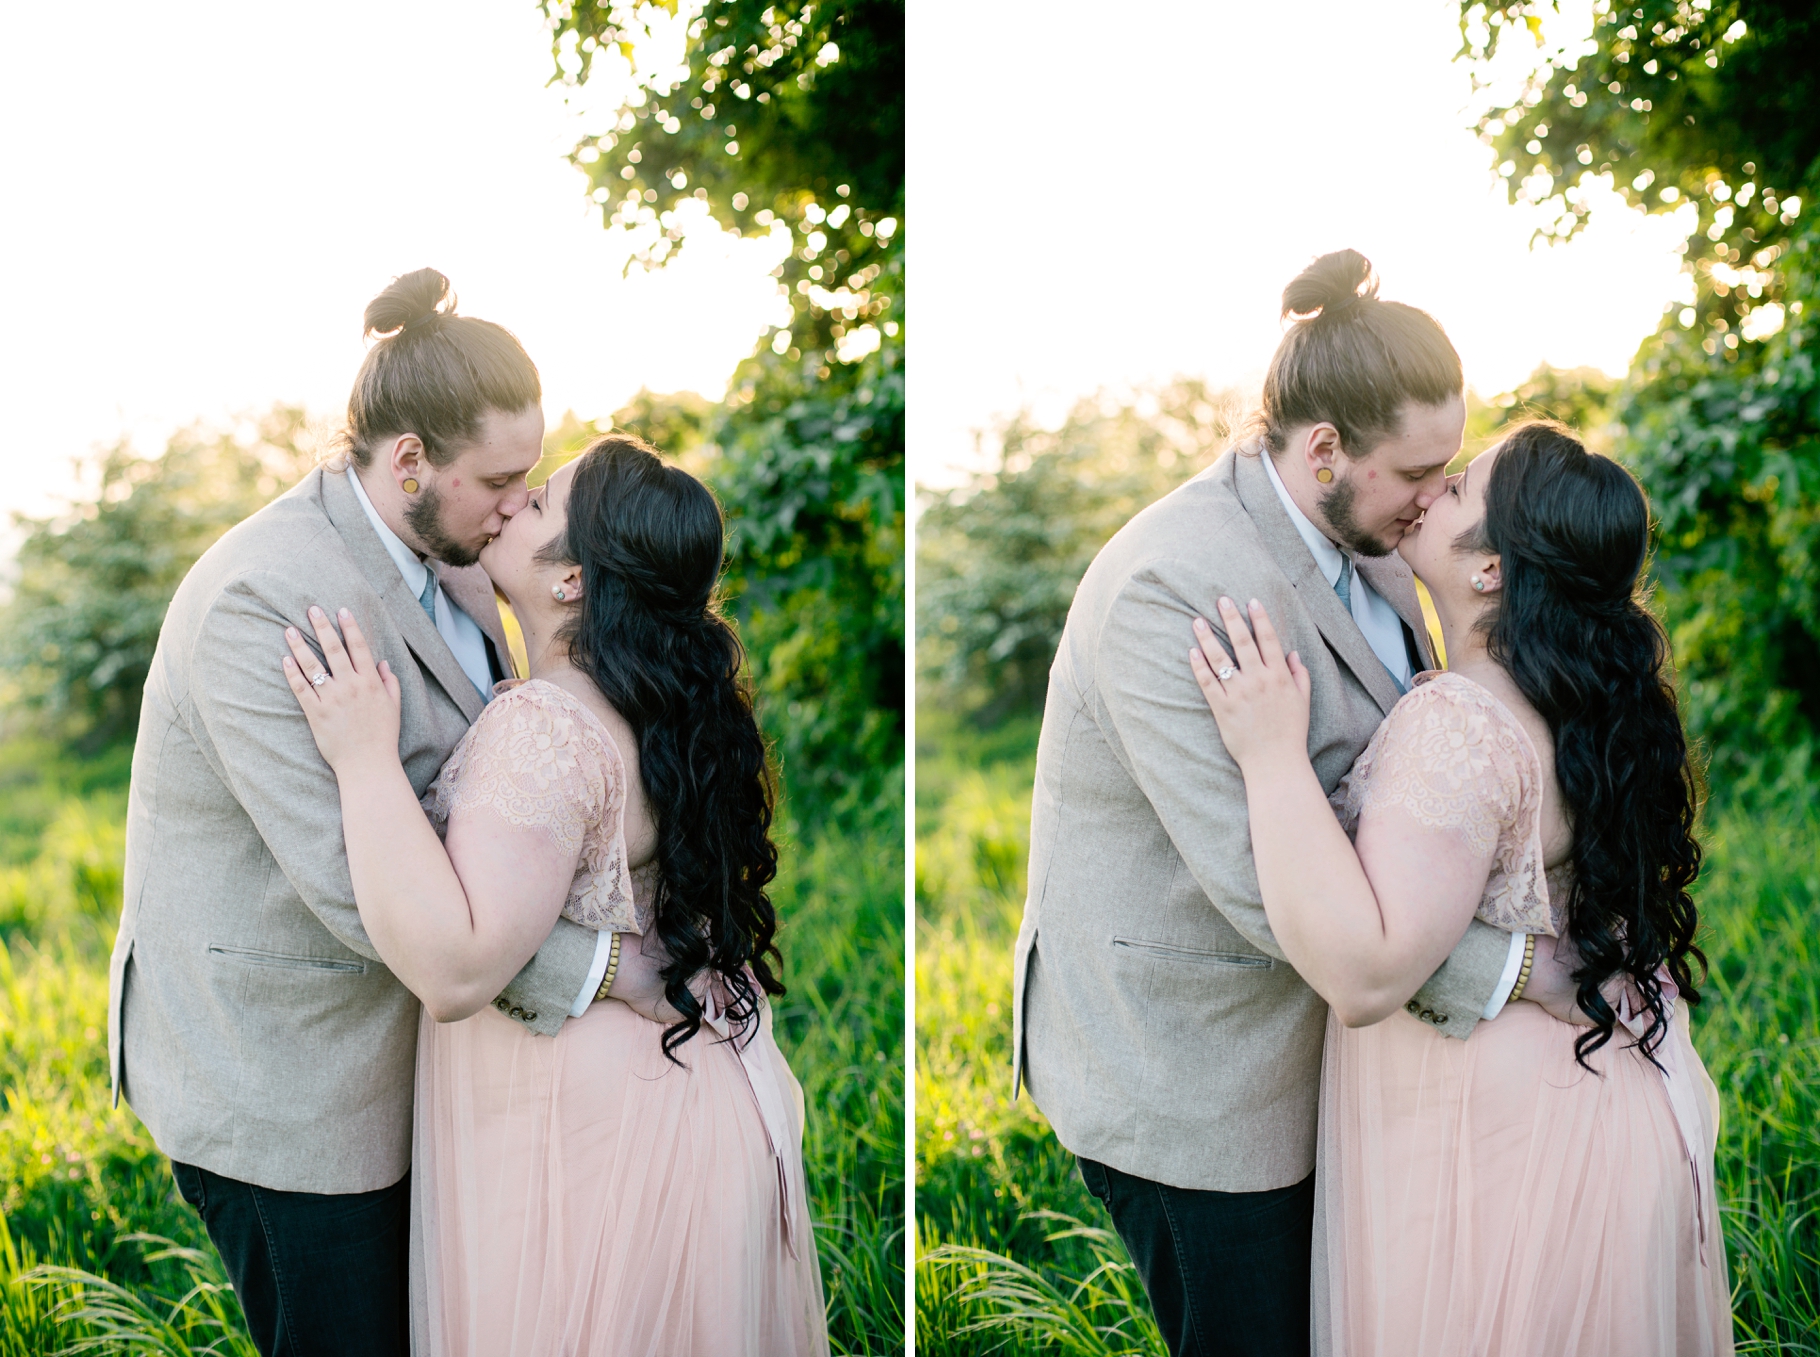 30-Bride-Groom-Elopement-Discovery-Park-Rustic-Meadow-Open-Field-Seattle-Sunset-Photographer-Wedding-Photography-by-Betty-Elaine-Blush-BHLDN-Wedding-Gown-Dress